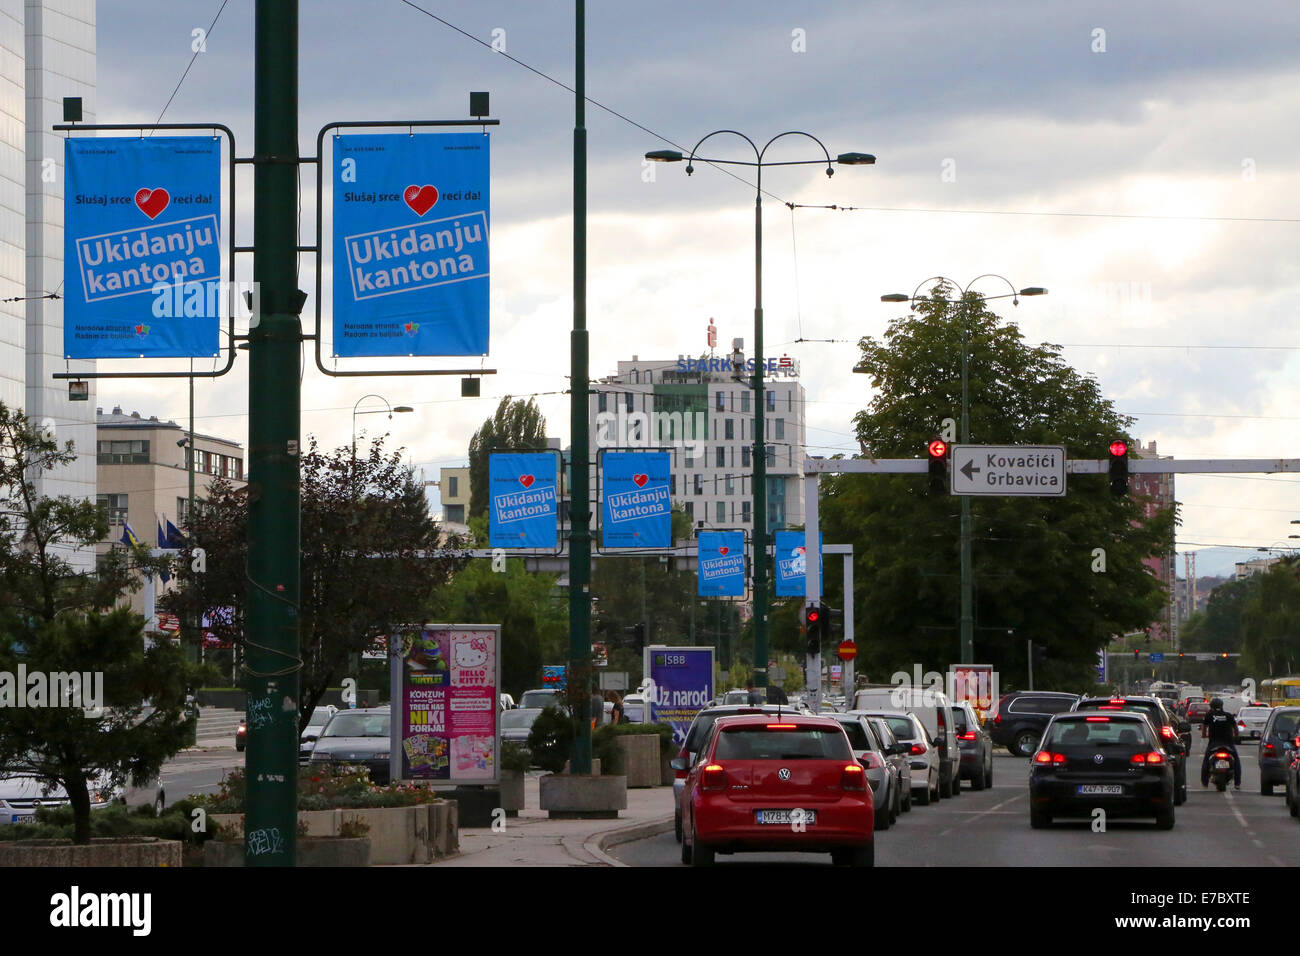 Sarajevo, Bosnia and Herzegovina. 12th Sep, 2014. Campaign posters are seen in the center of Sarajevo, Bosnia and Herzegovina, on Sept. 12, 2014. With the month-long campaign for the general elections officially kicking off in BiH on Friday, the Balkan state begins the complex process to bring in new governments, assemblies and presidencies in different levels. © Haris Memija/Xinhua/Alamy Live News Stock Photo